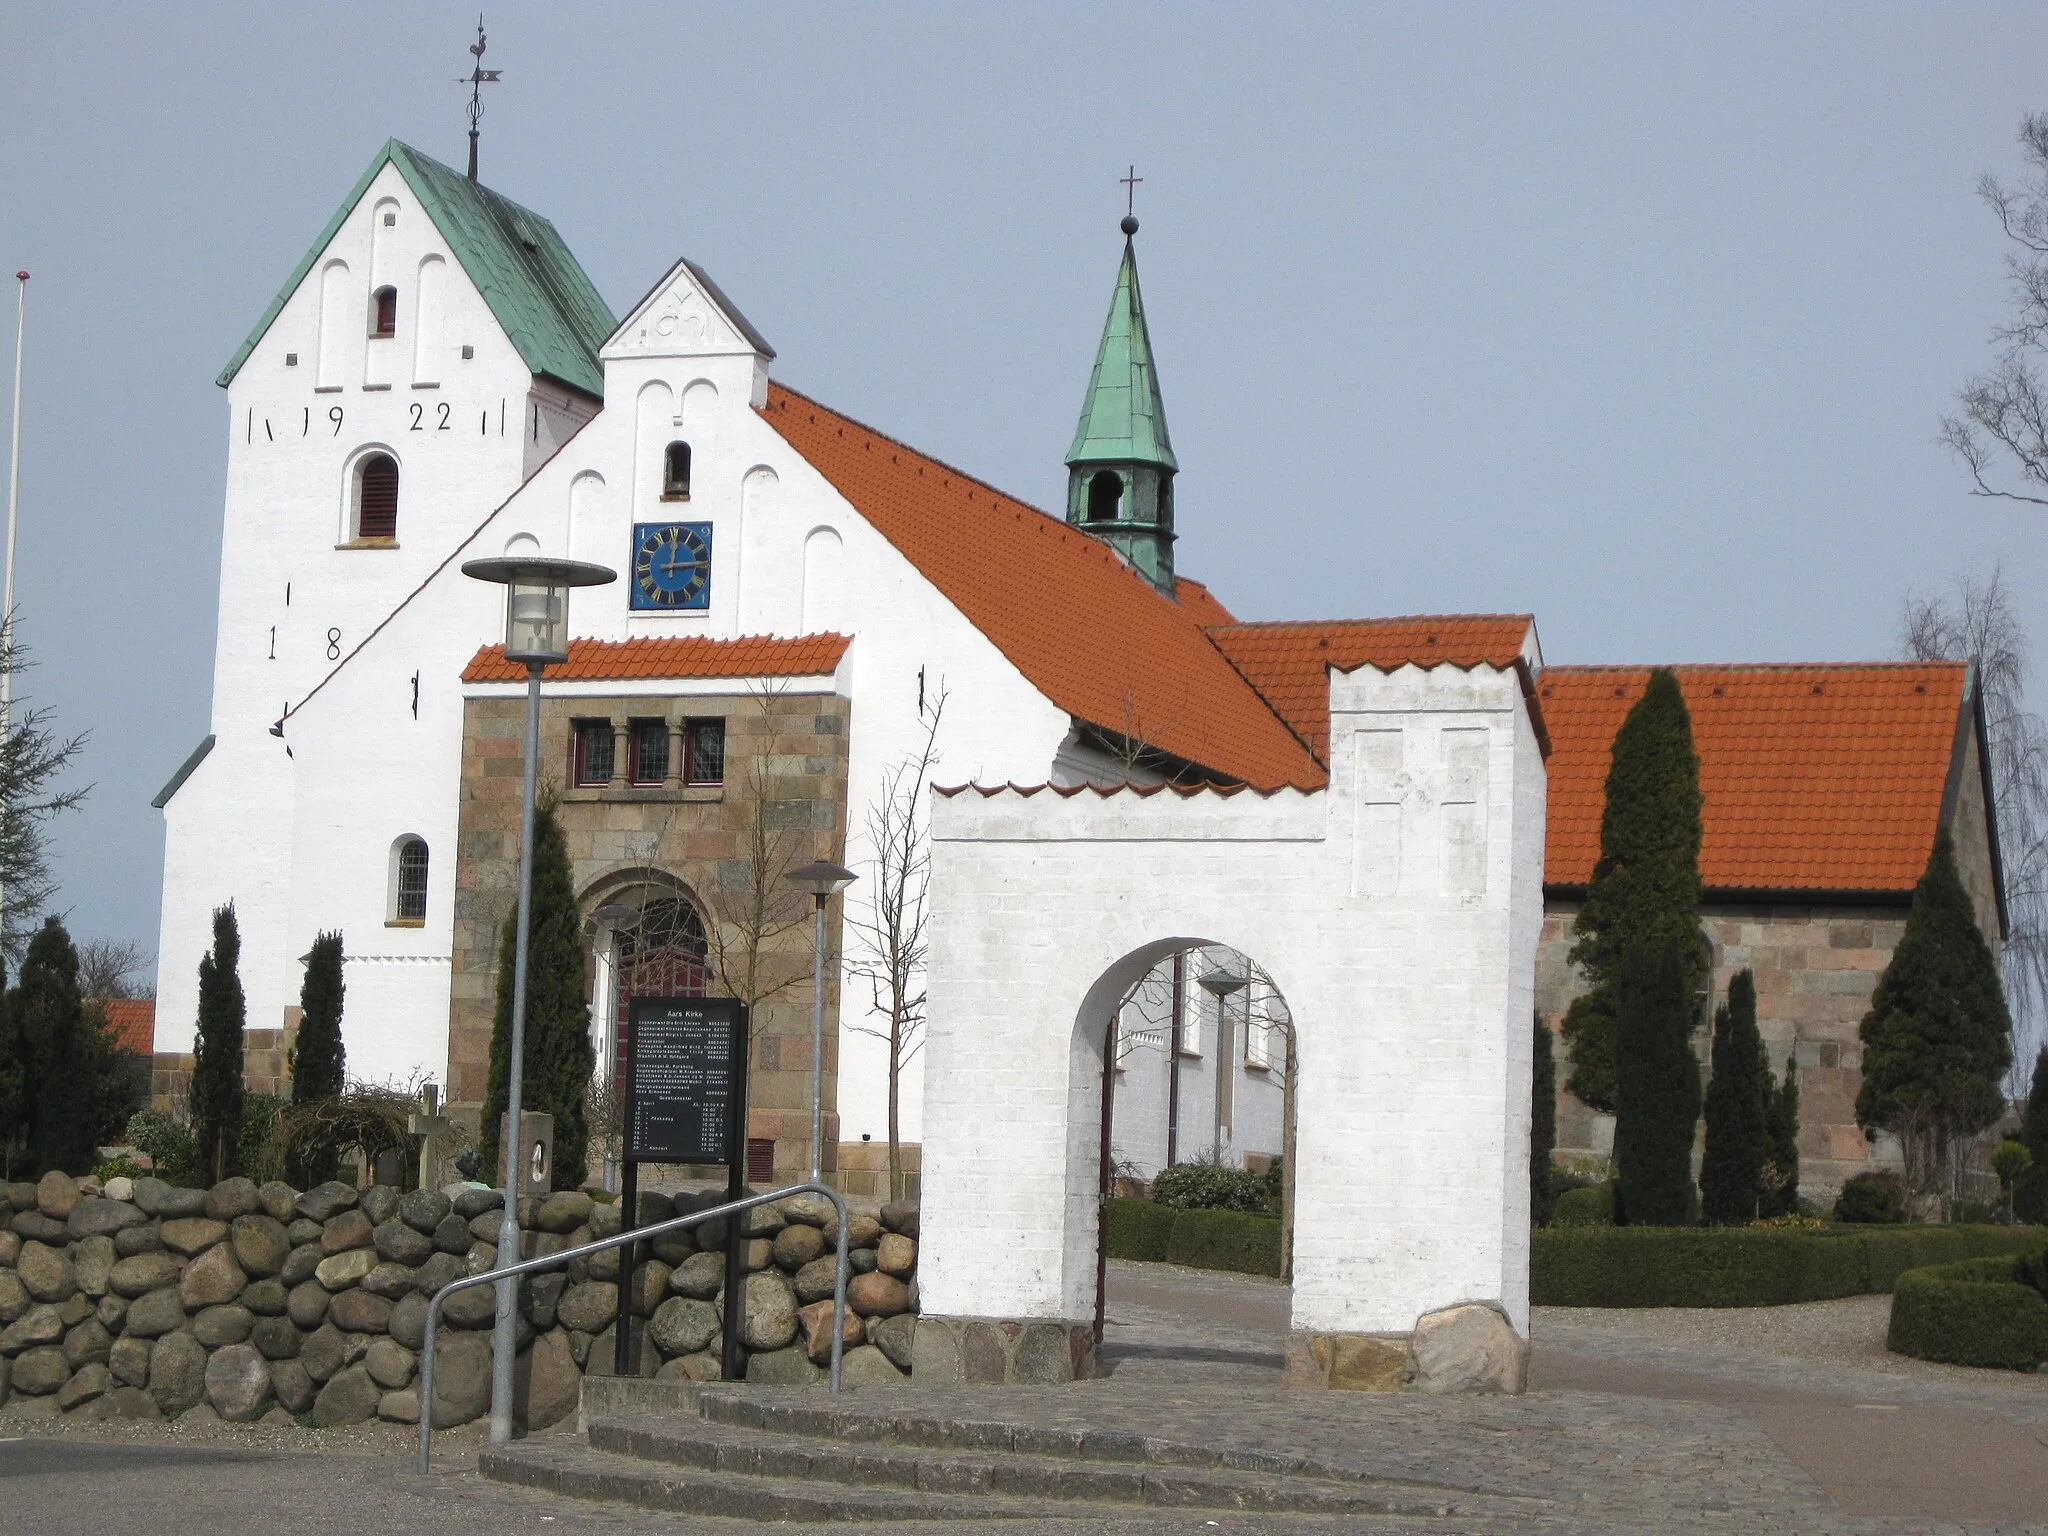 Photo showing: The church "Aars Kirke" in the small town "Aars". The town is located in North Jutland, Denmark.